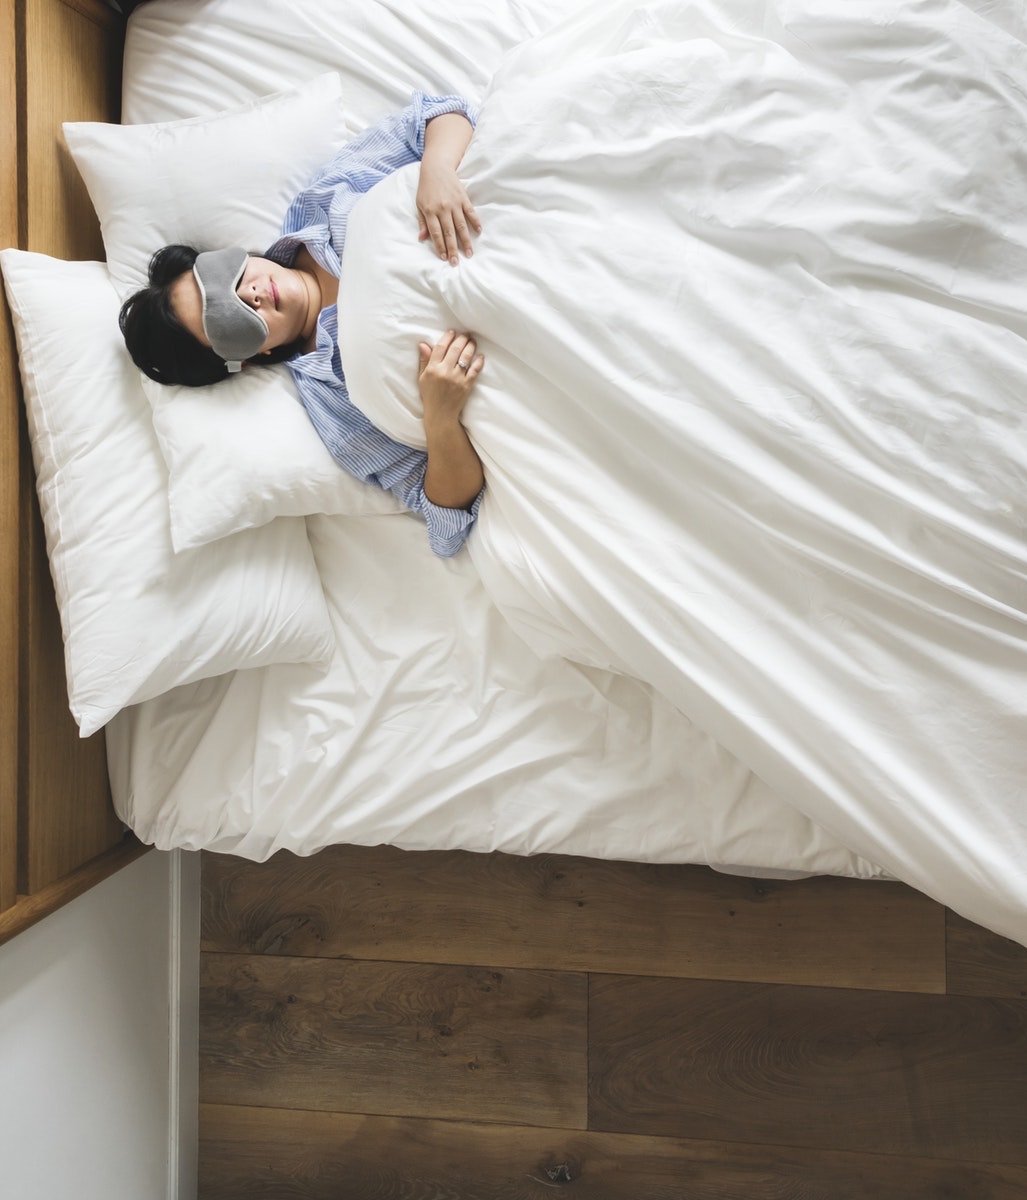 Why sleeping on a bad mattress can lead to back pain ...